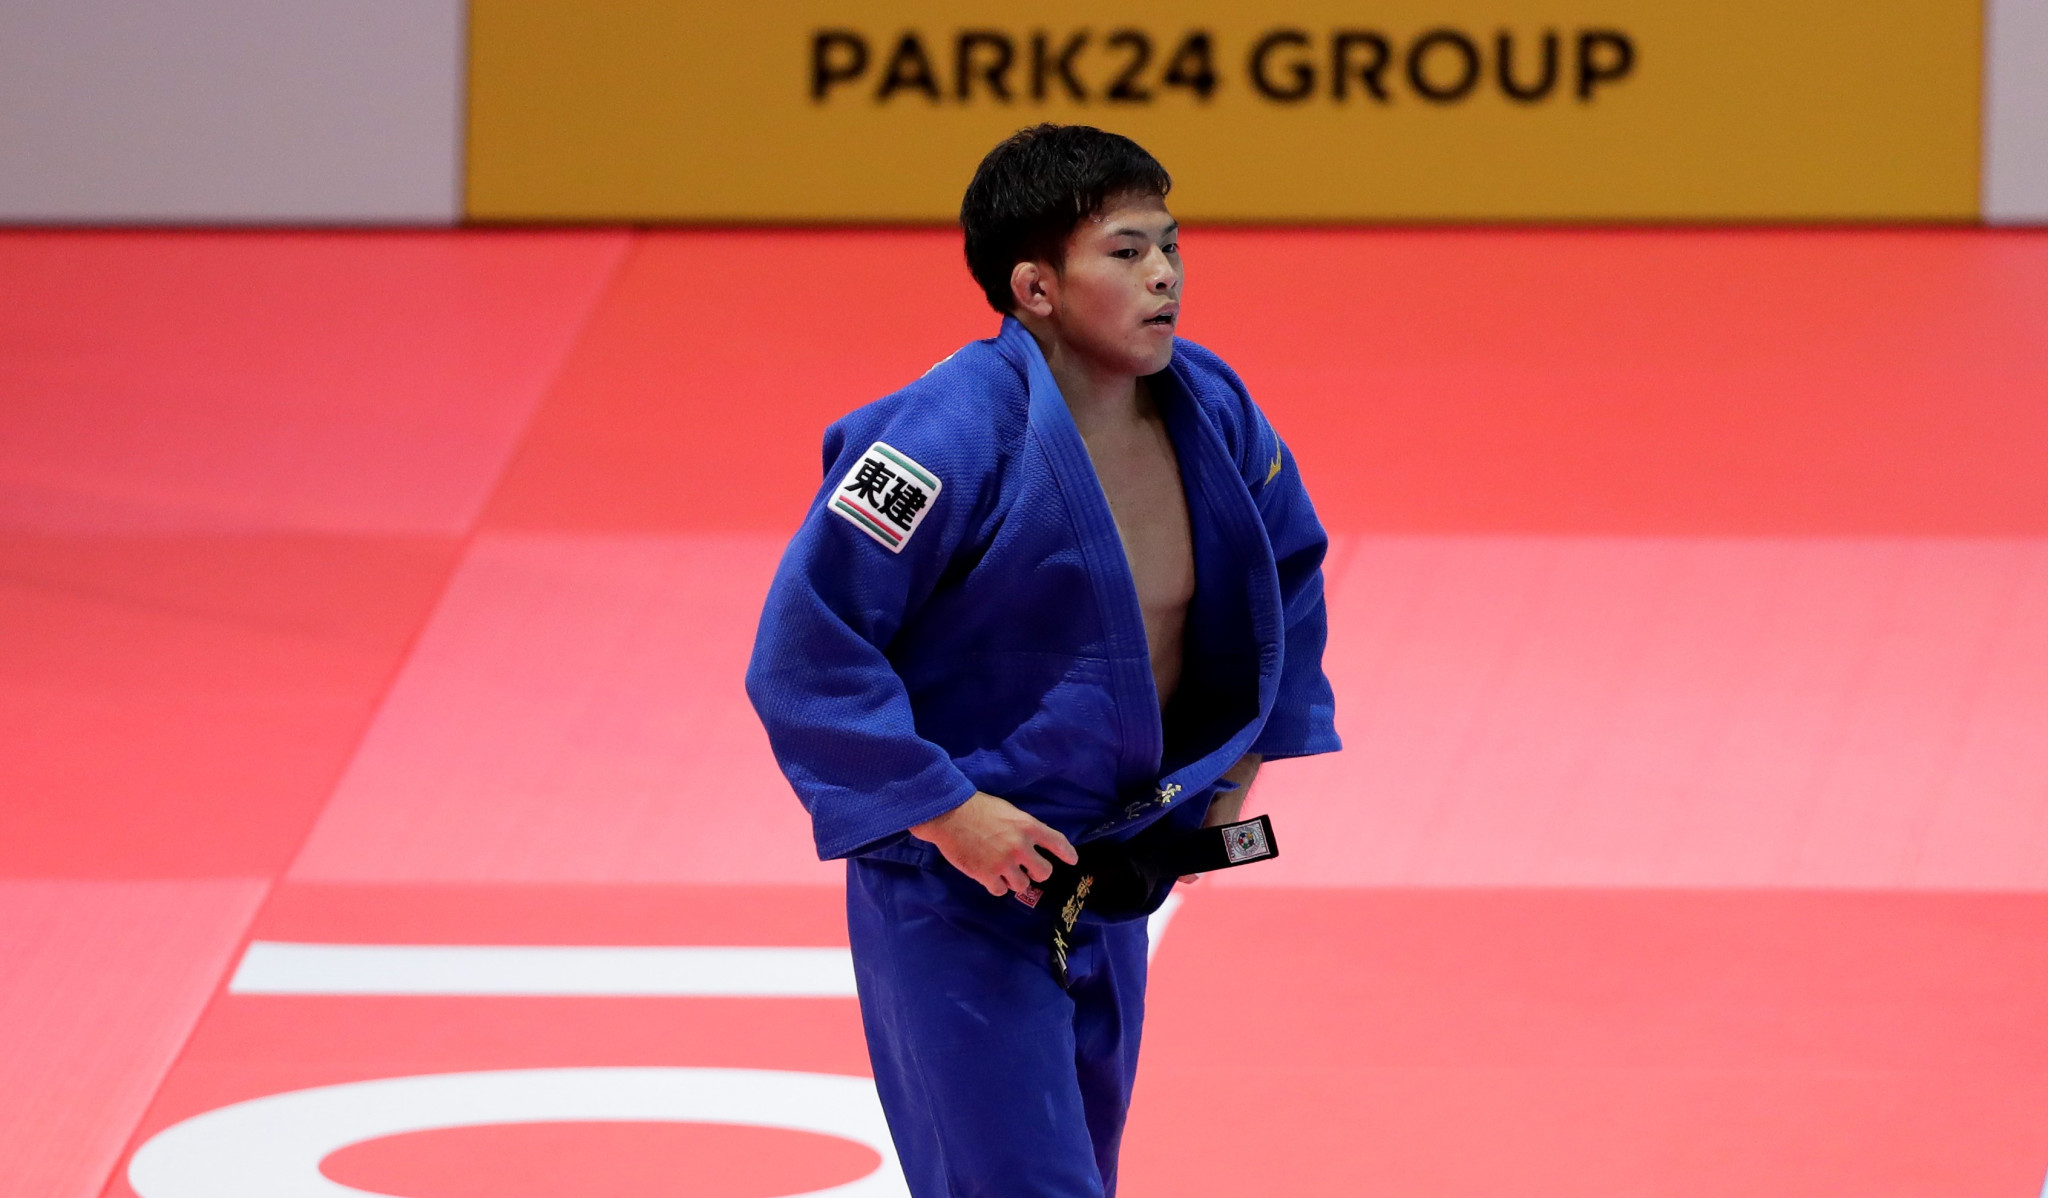 Olympic bronze medallist and three-time world champion Naohisa Takato was among the gold medallists on day one in Bishkek ©Getty Images